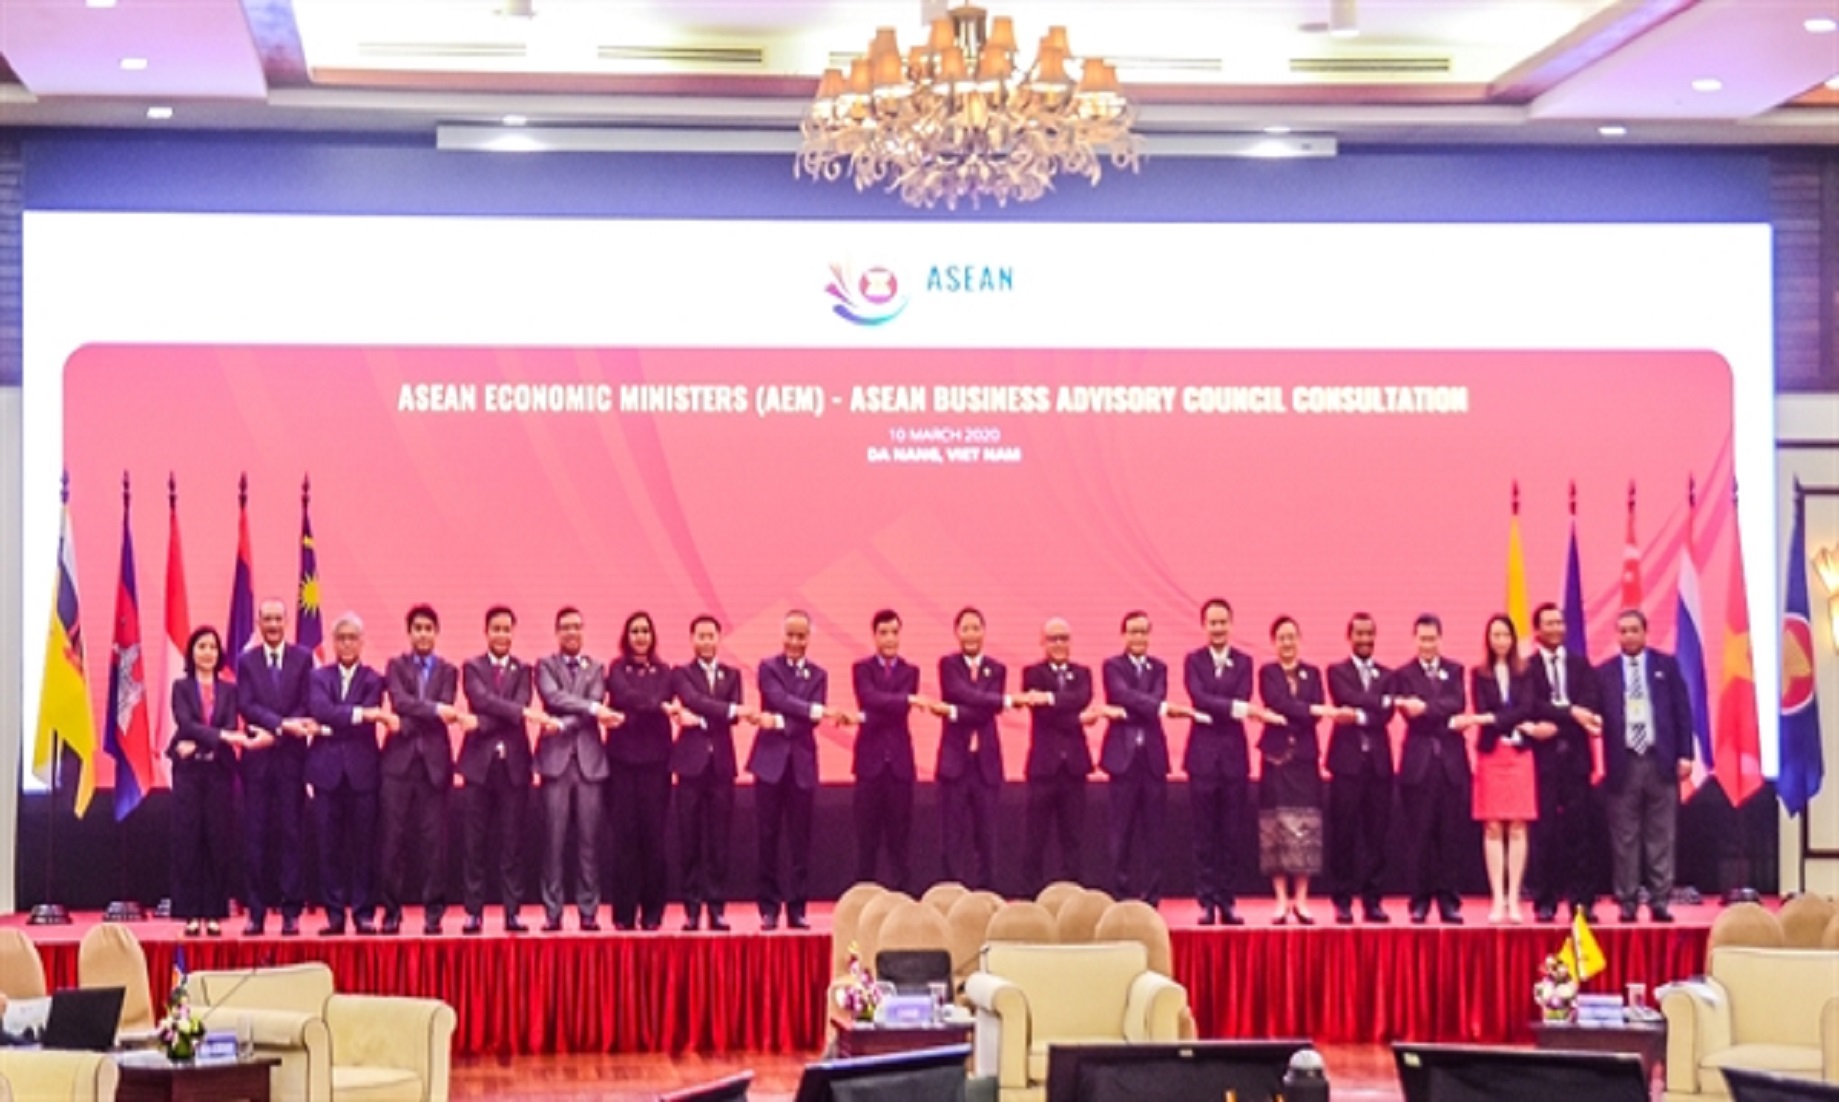 ASEAN Economic Ministers Prioritise Promoting Connectivity, Partnership, Efficiency